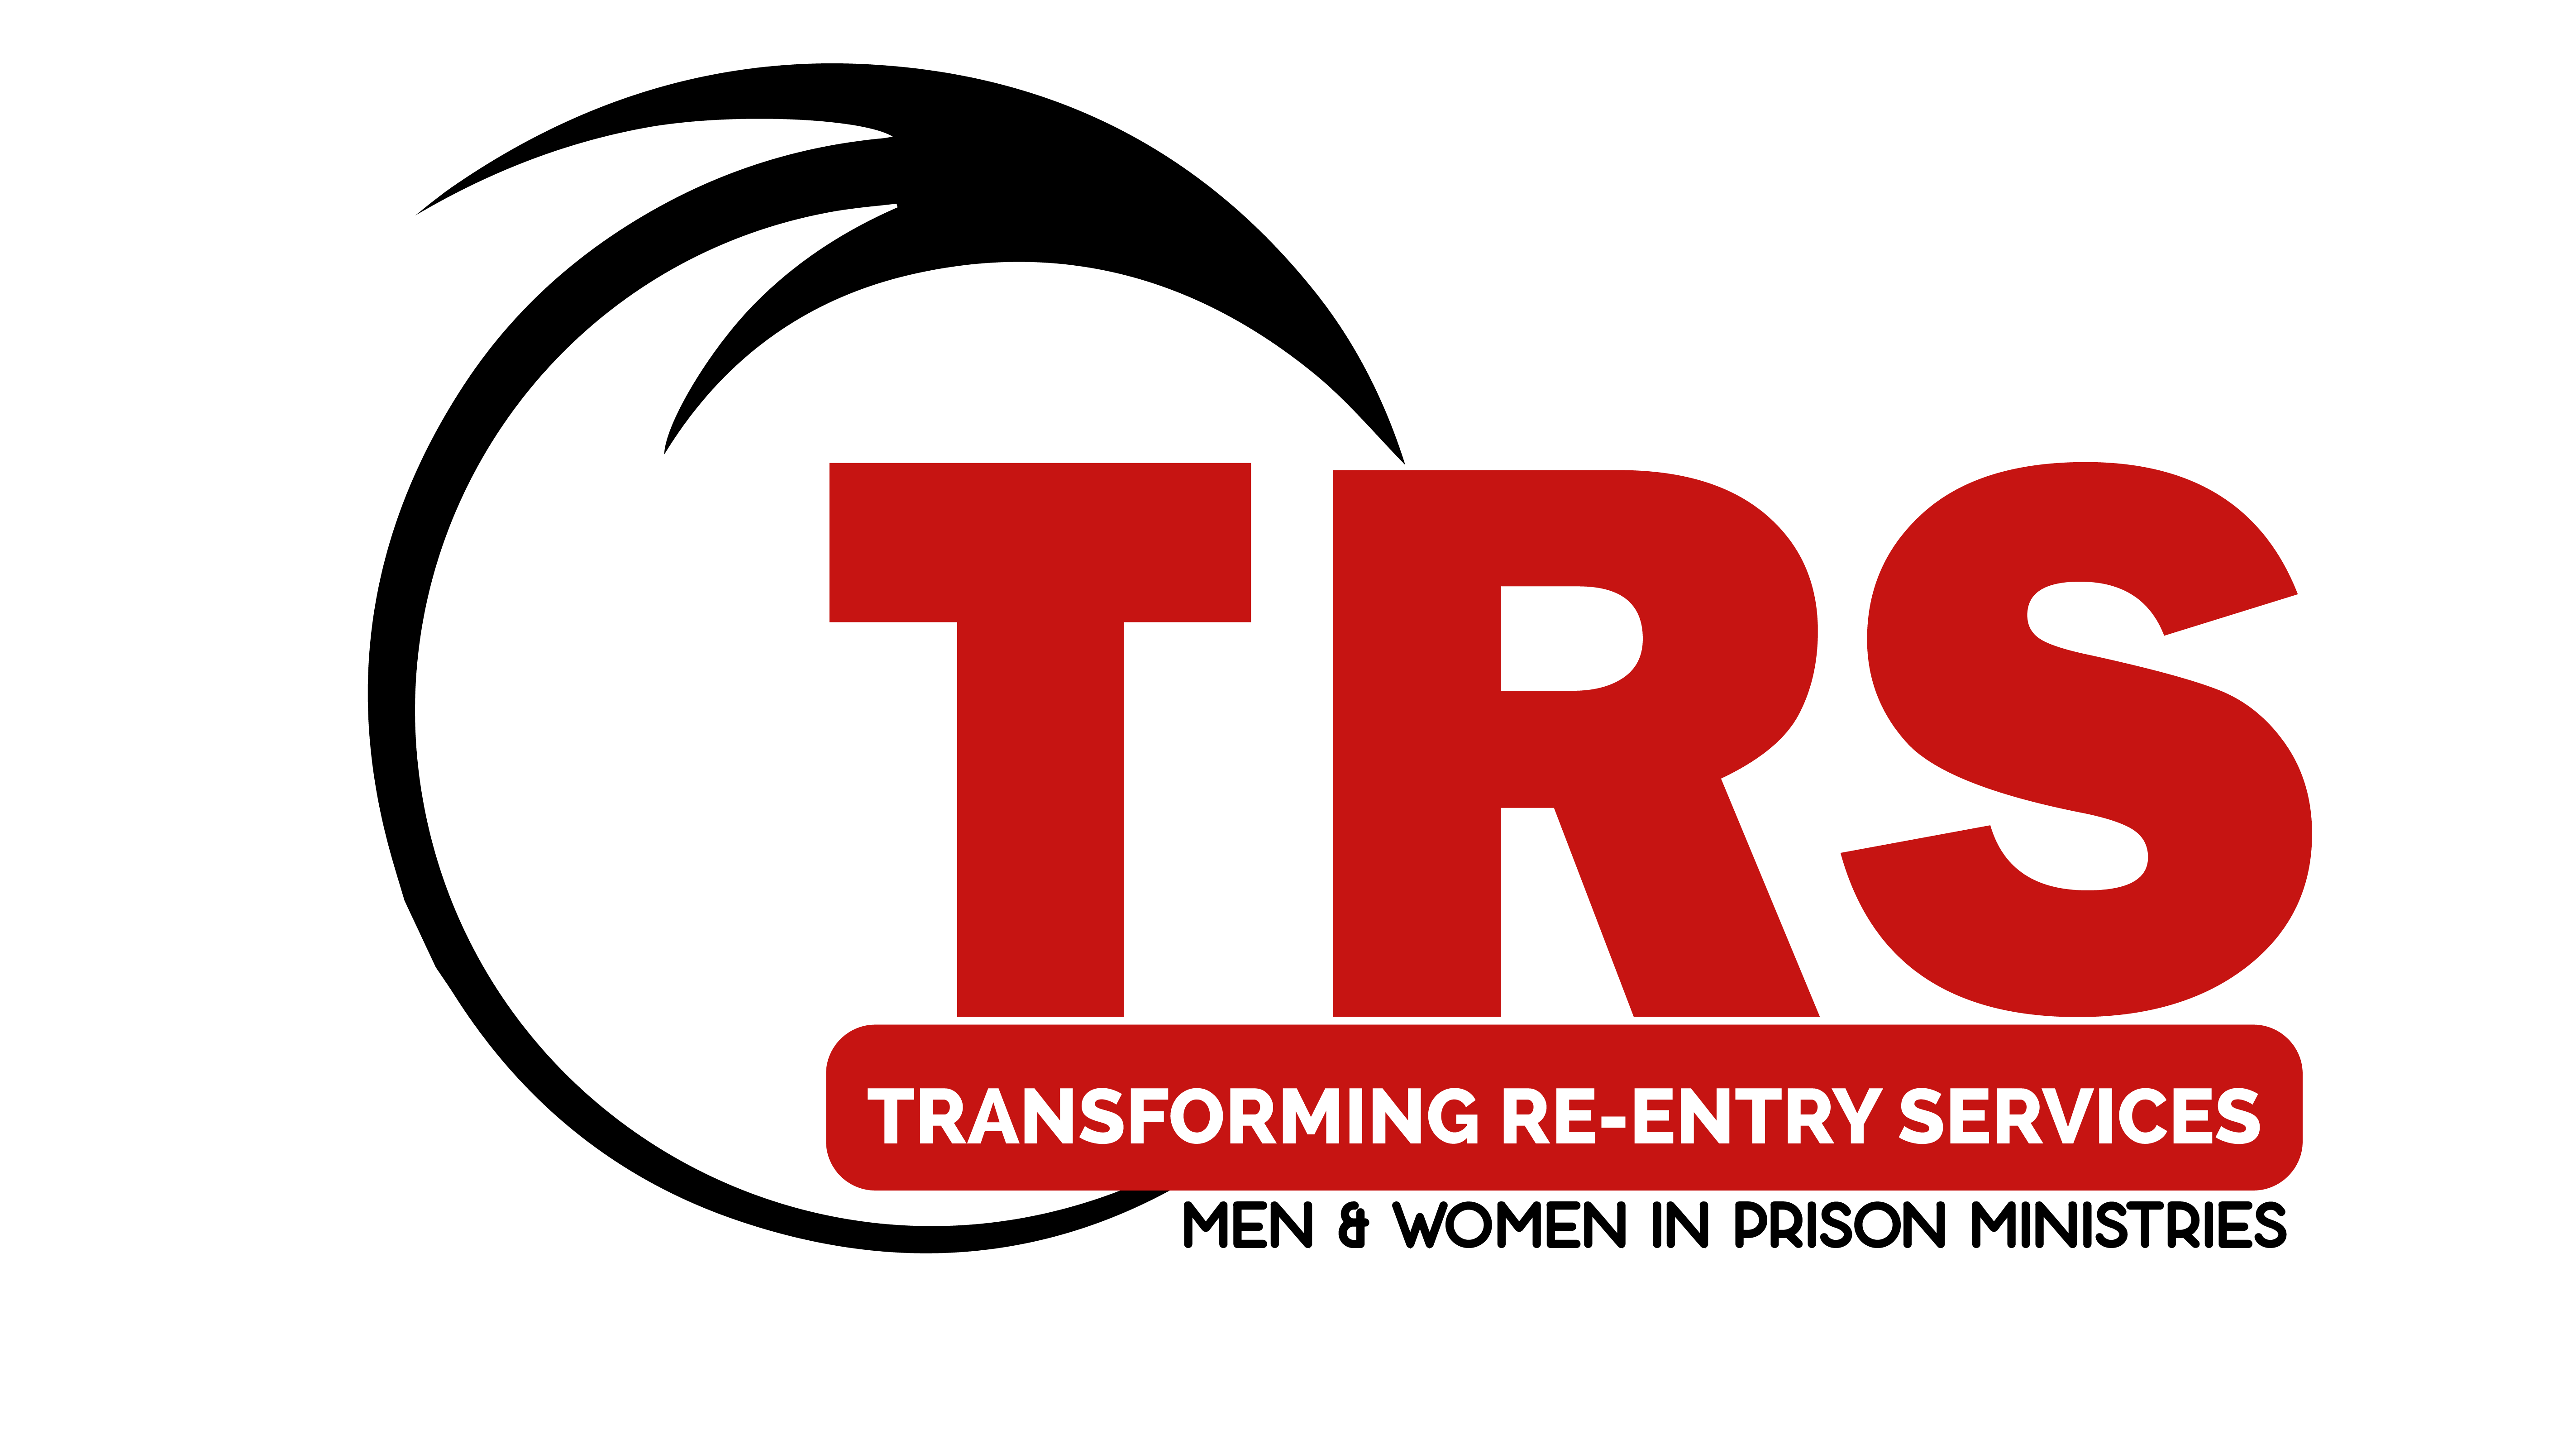 Transforming Reentry Services logo